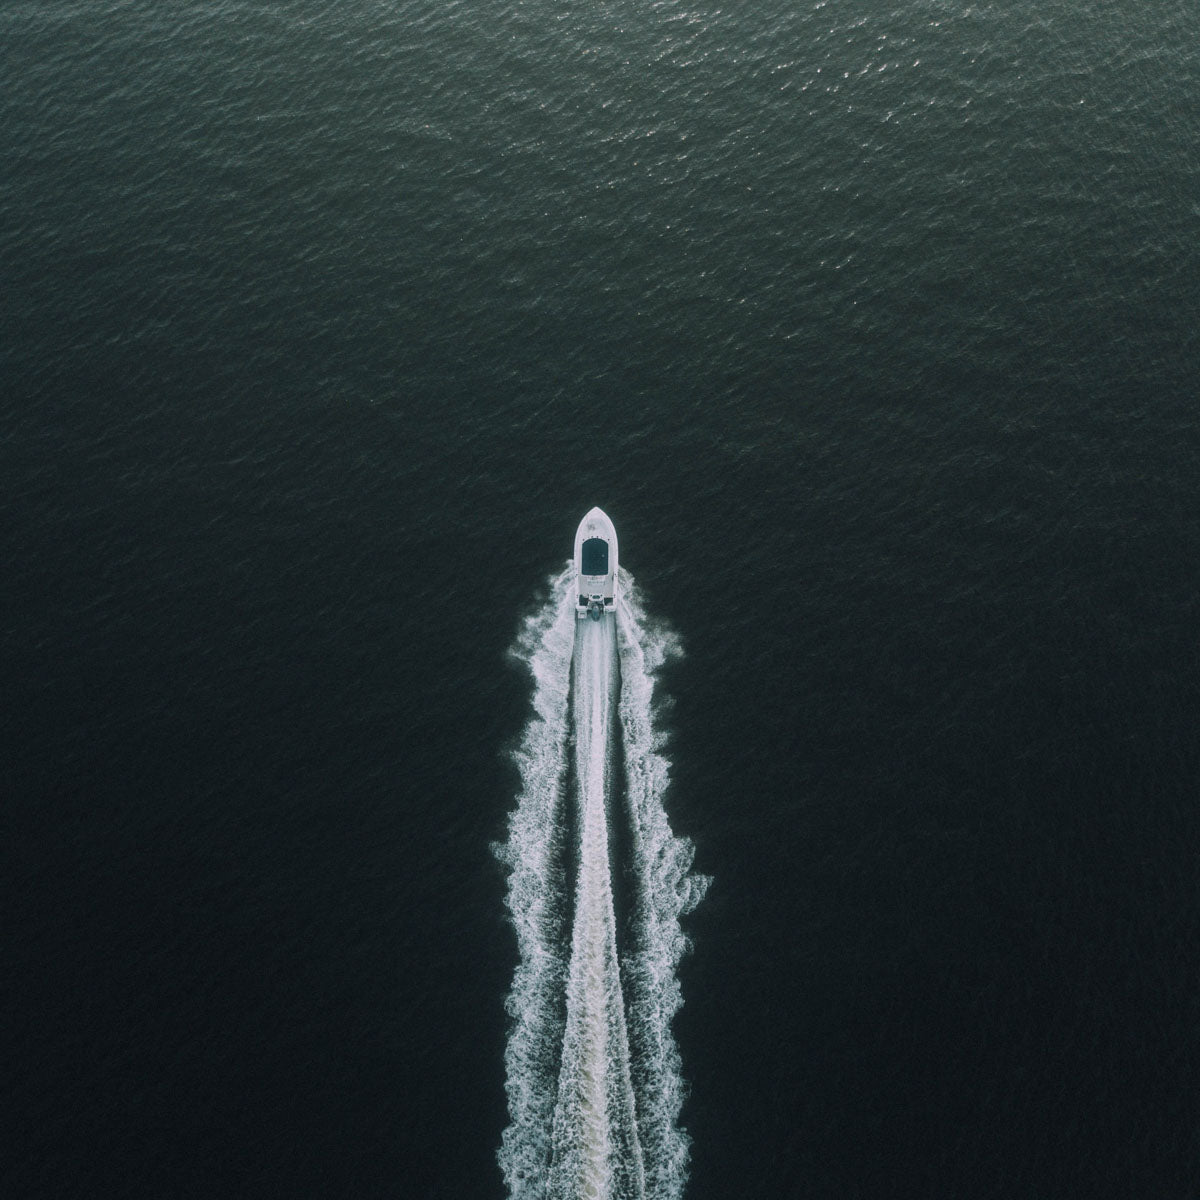 overhead shot of a power boat with a trailing wake